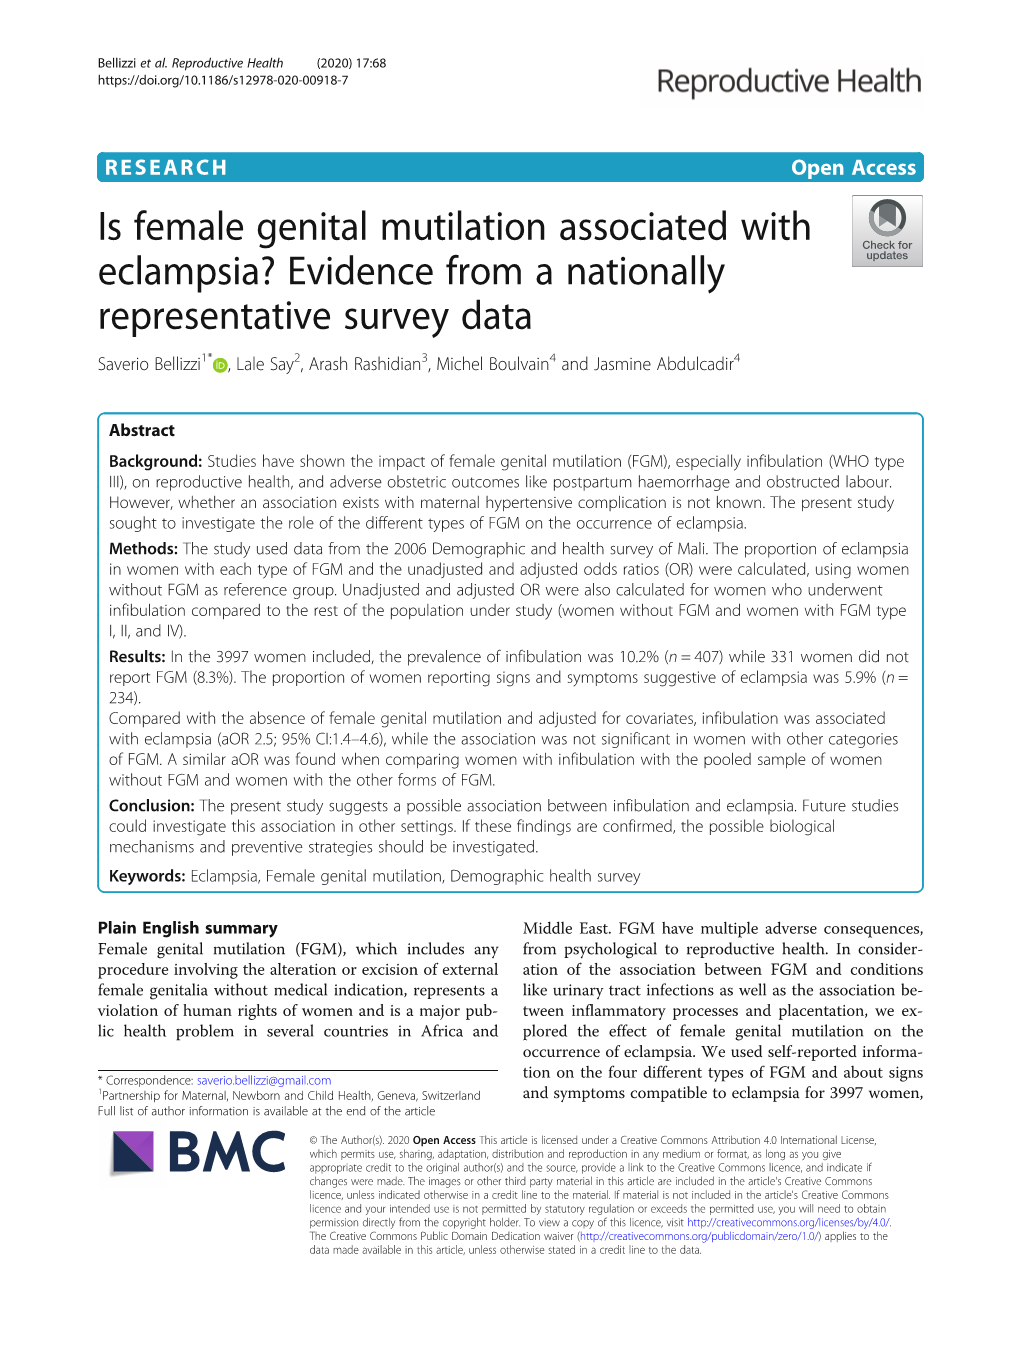 Is Female Genital Mutilation Associated with Eclampsia?